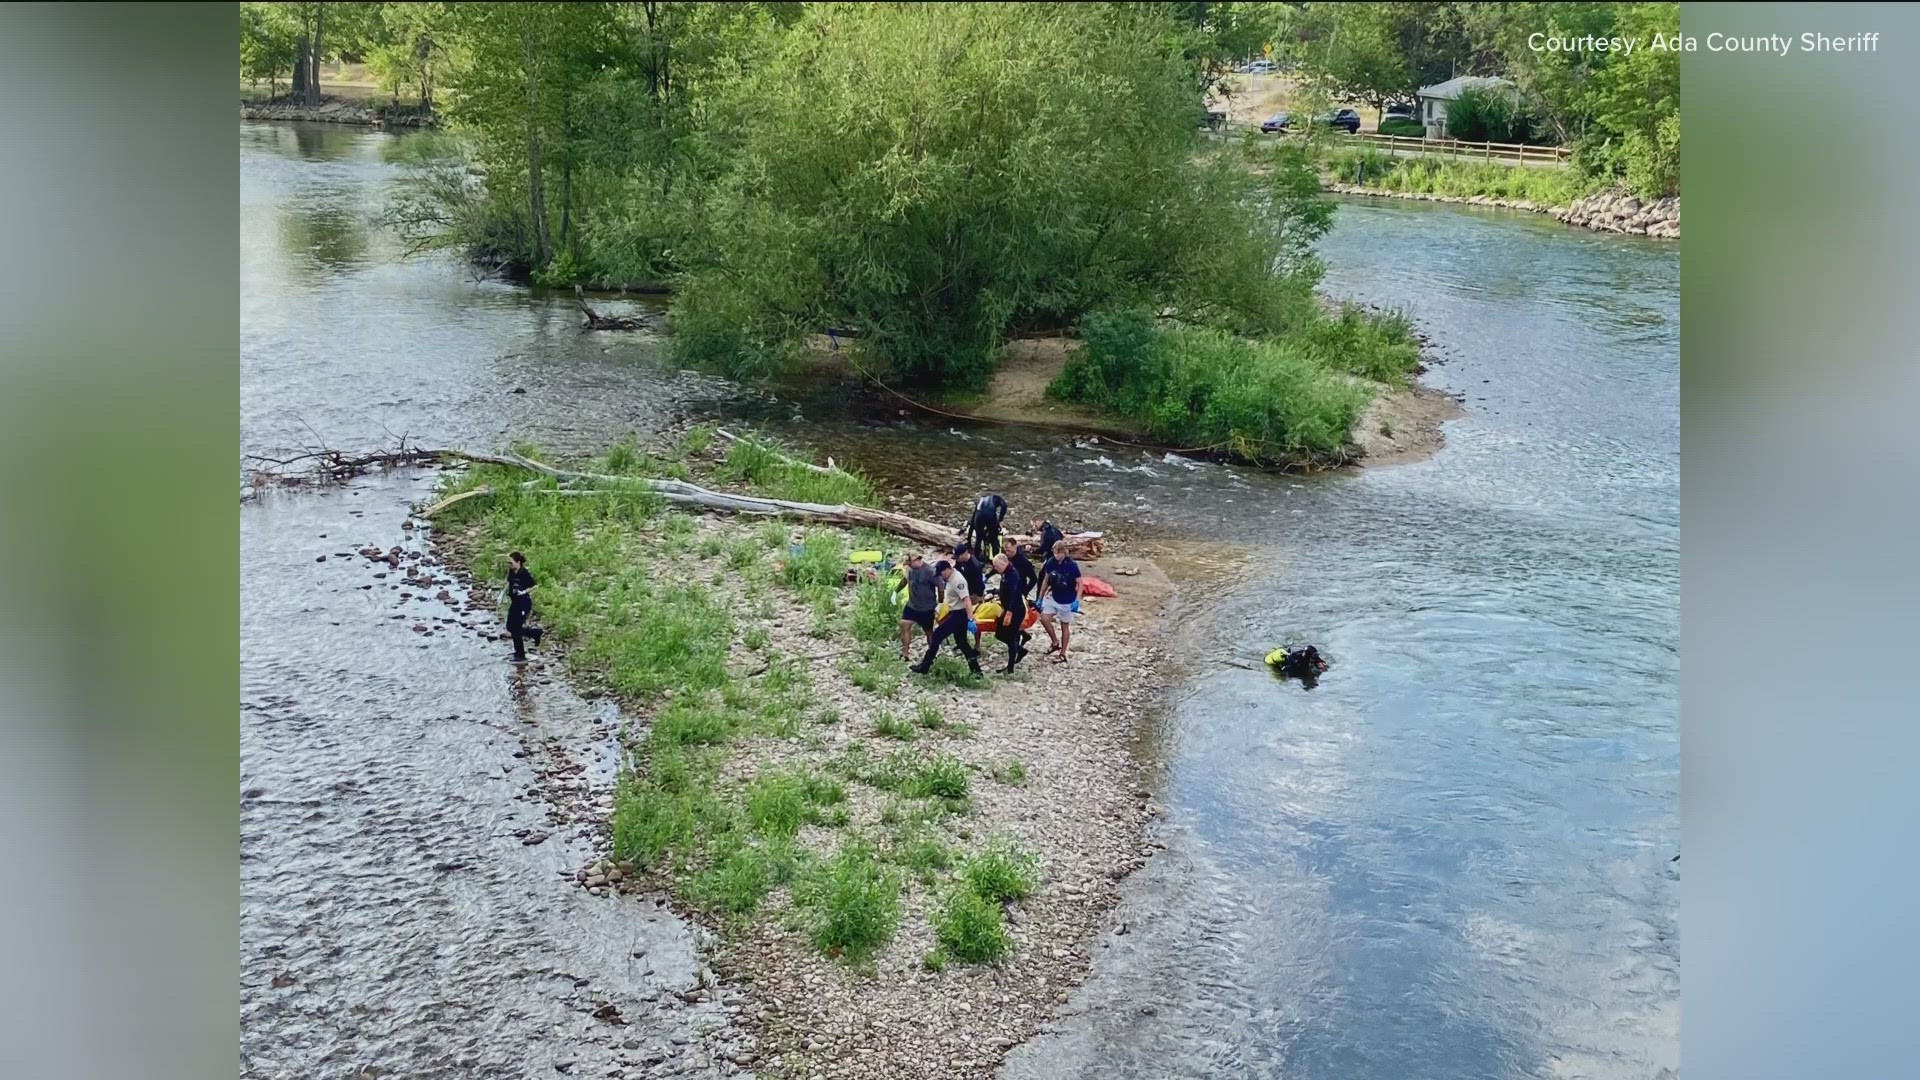 The dive team found the remains of a man on Saturday afternoon.